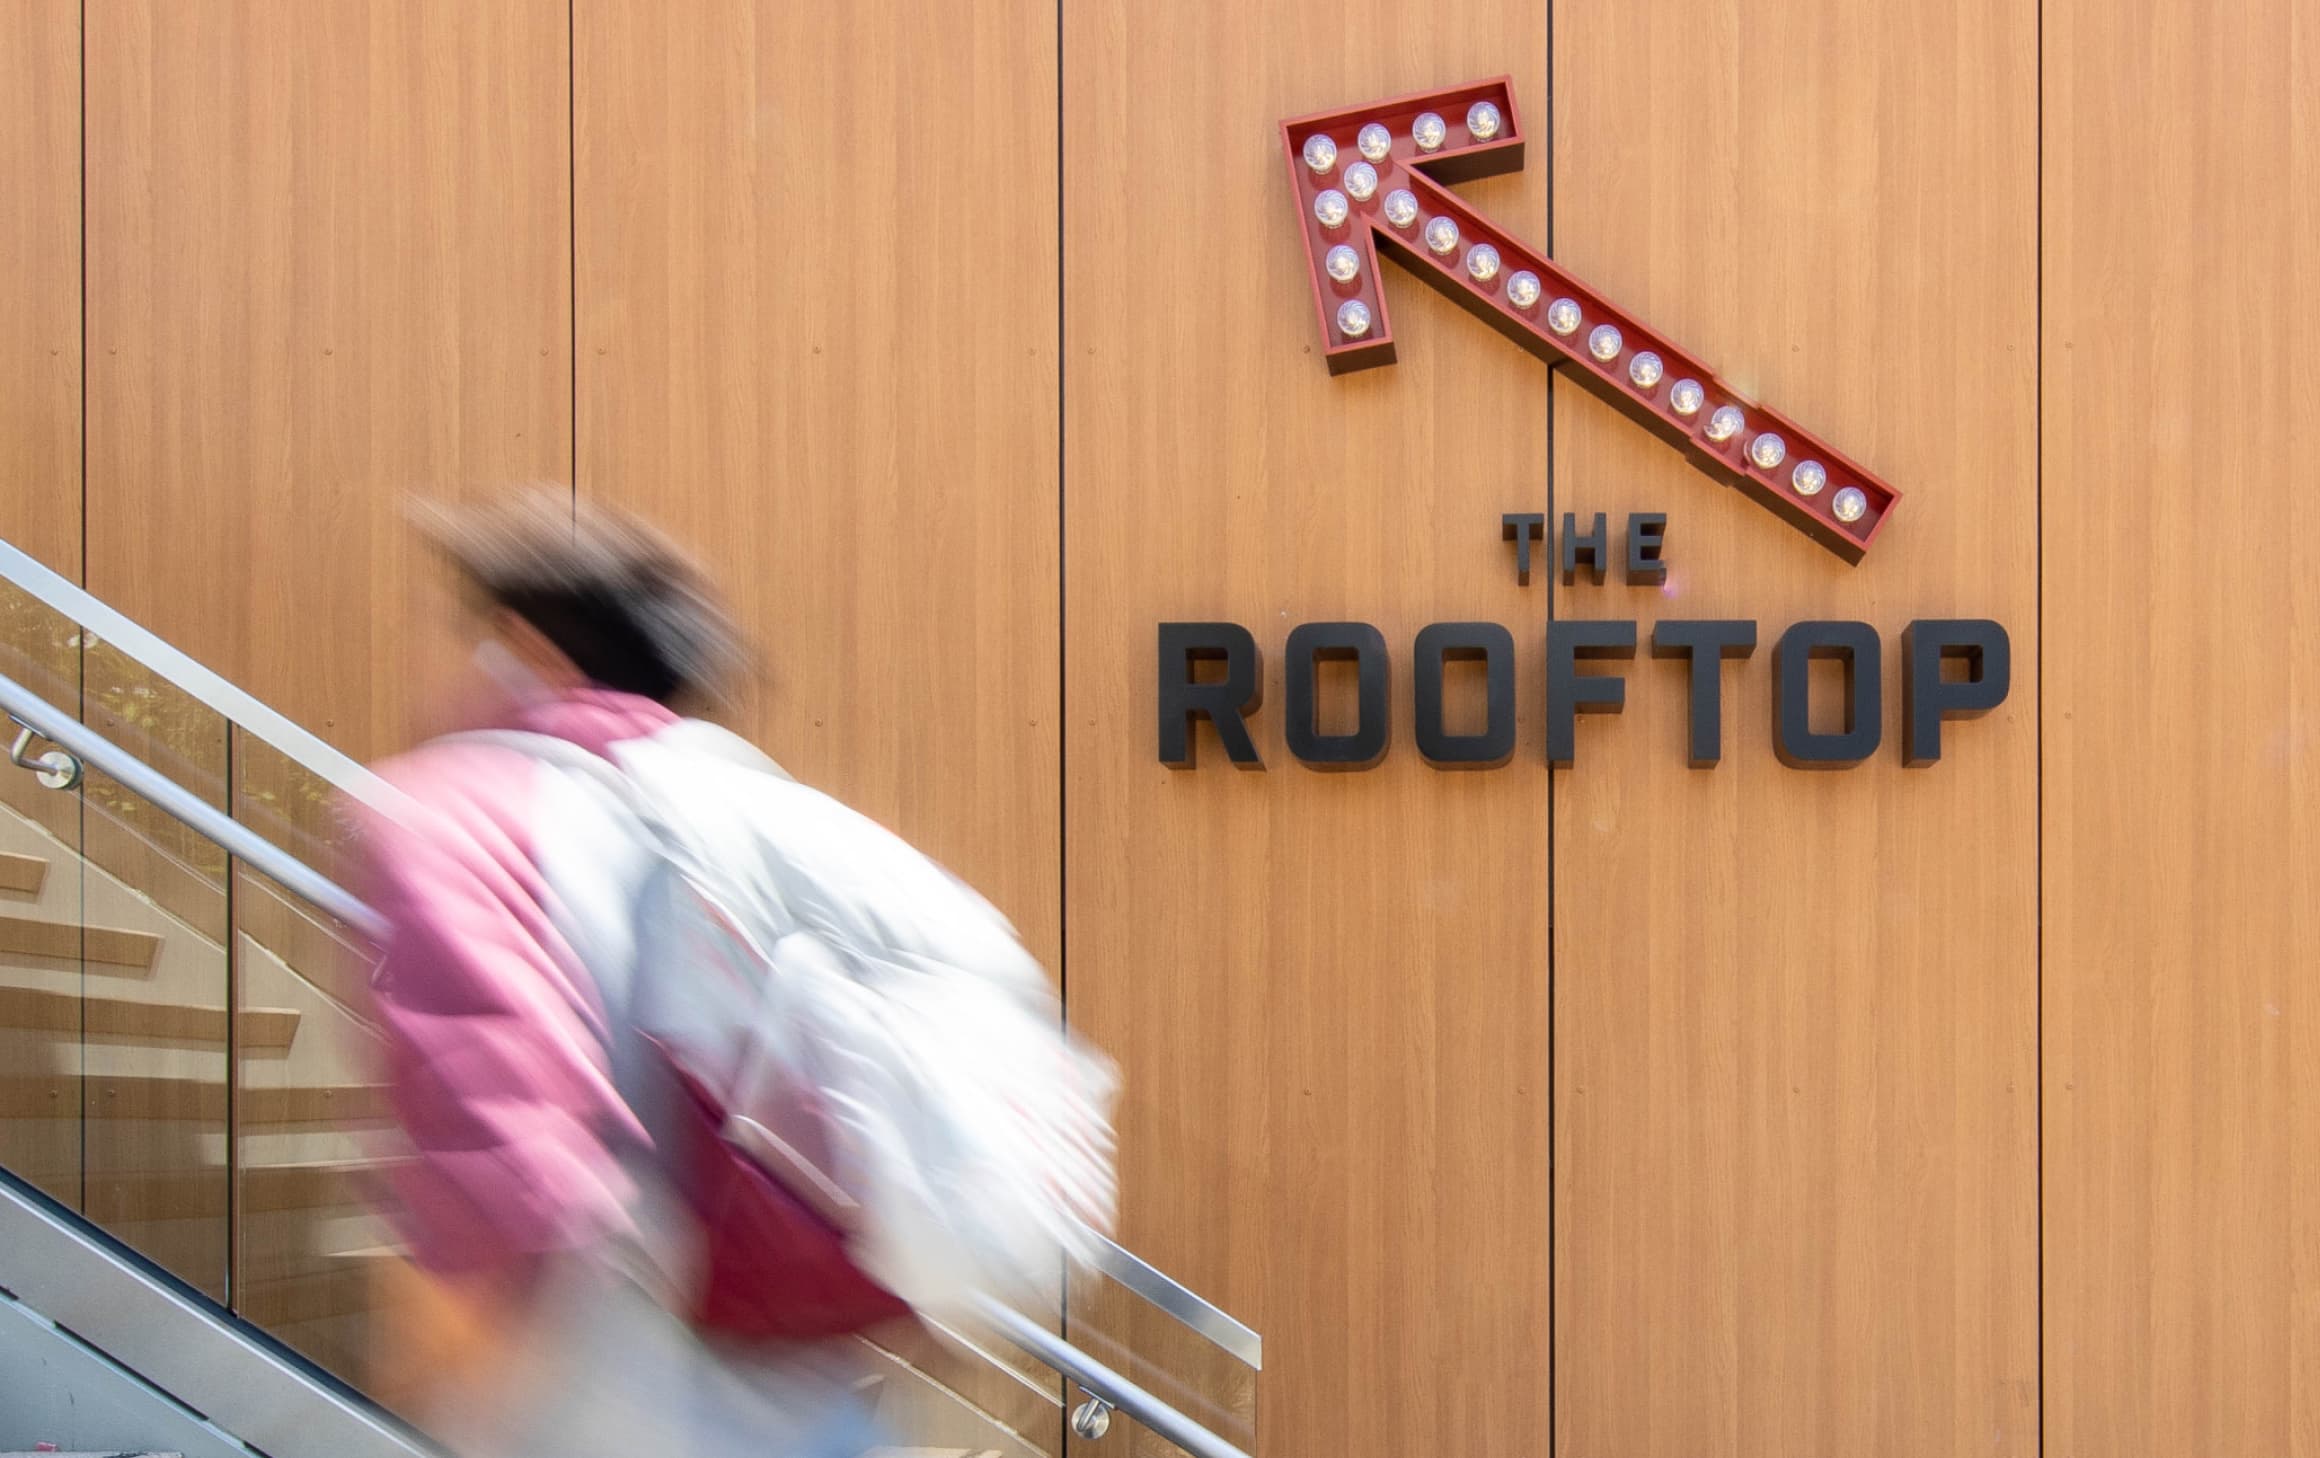 Red directional open channel arrow with exposed light bulbs mounted wall by staircase above black "THE ROOFTOP" dimensional letters signage for UC San Diego Sixth College Dining Hall by RSM Design in San Diego, California.